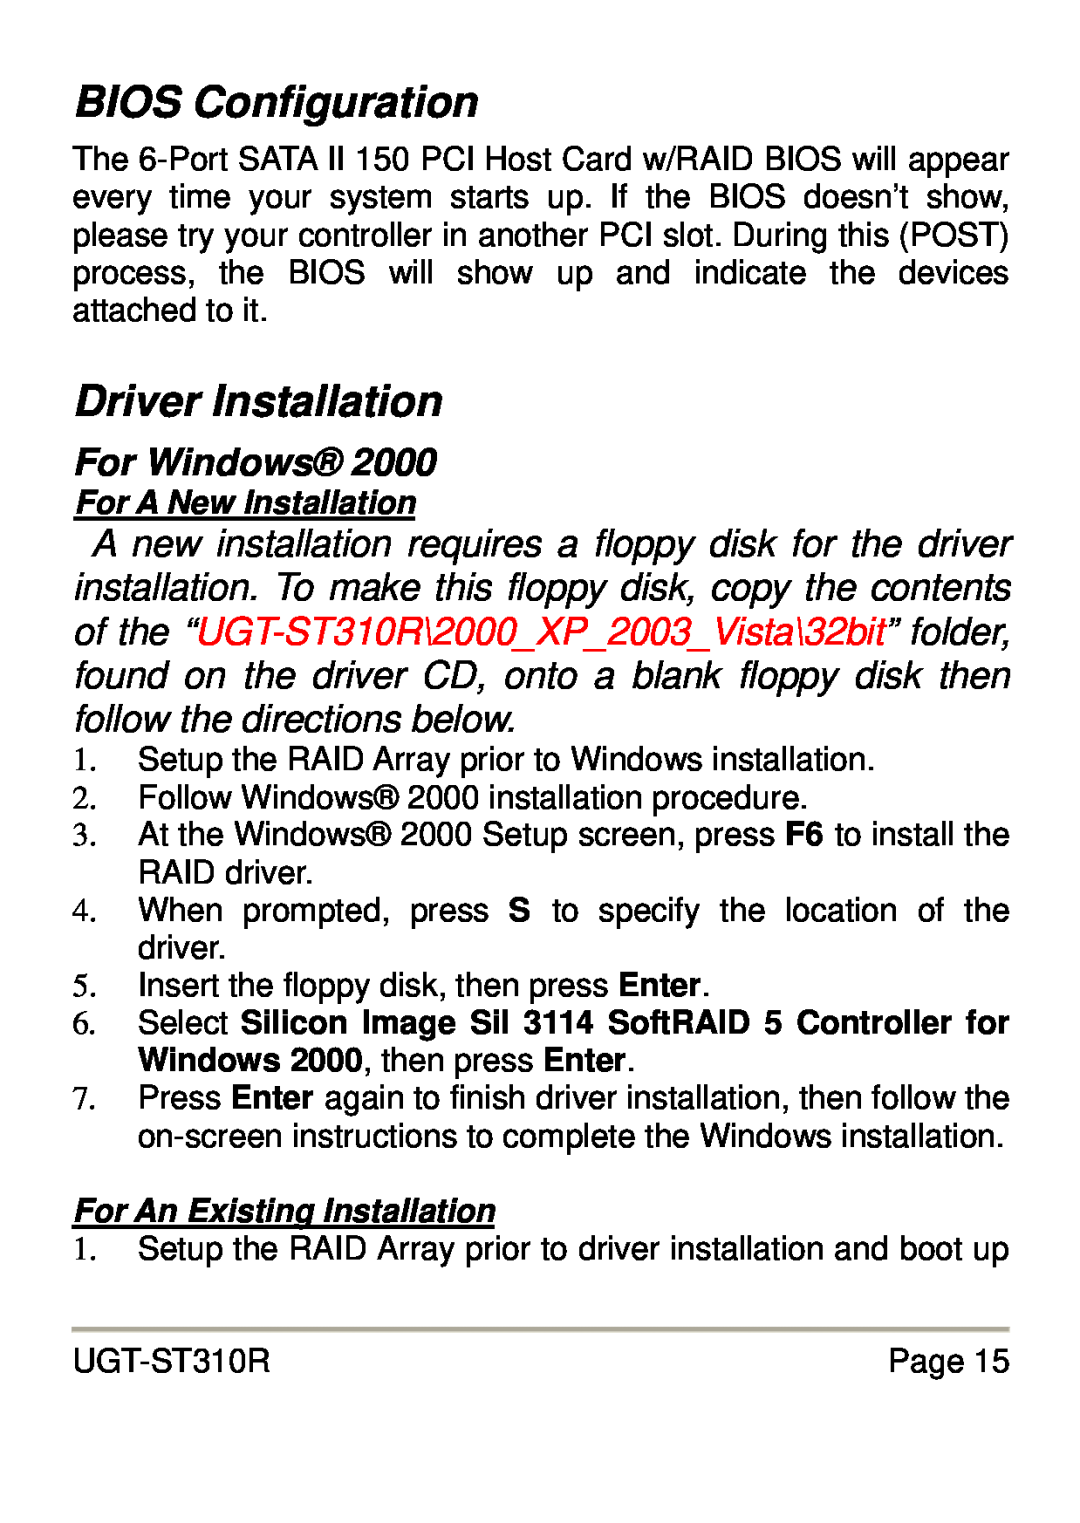 Vantec UGT-ST310R user manual BIOS Configuration, Driver Installation, For Windows, For A New Installation 